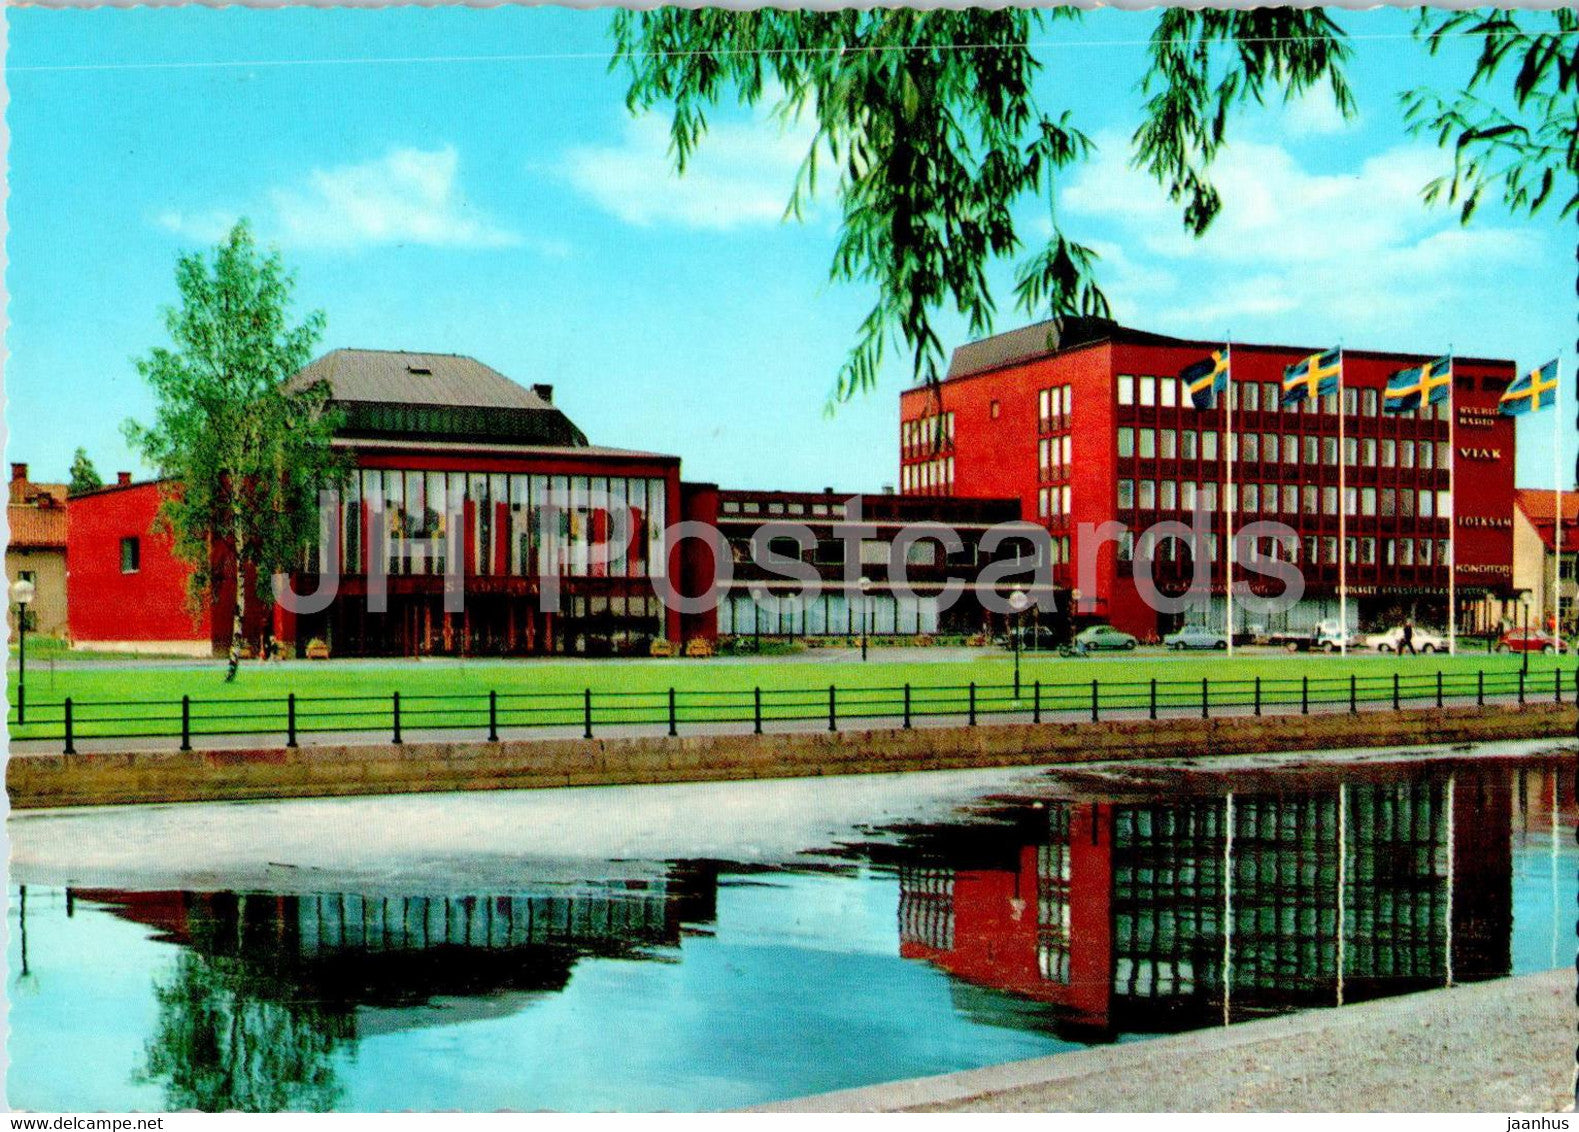 Dalarna - Falun - Folkets Hus med Stadsteatern - The People's House - Theatre - Sweden - unused - JH Postcards